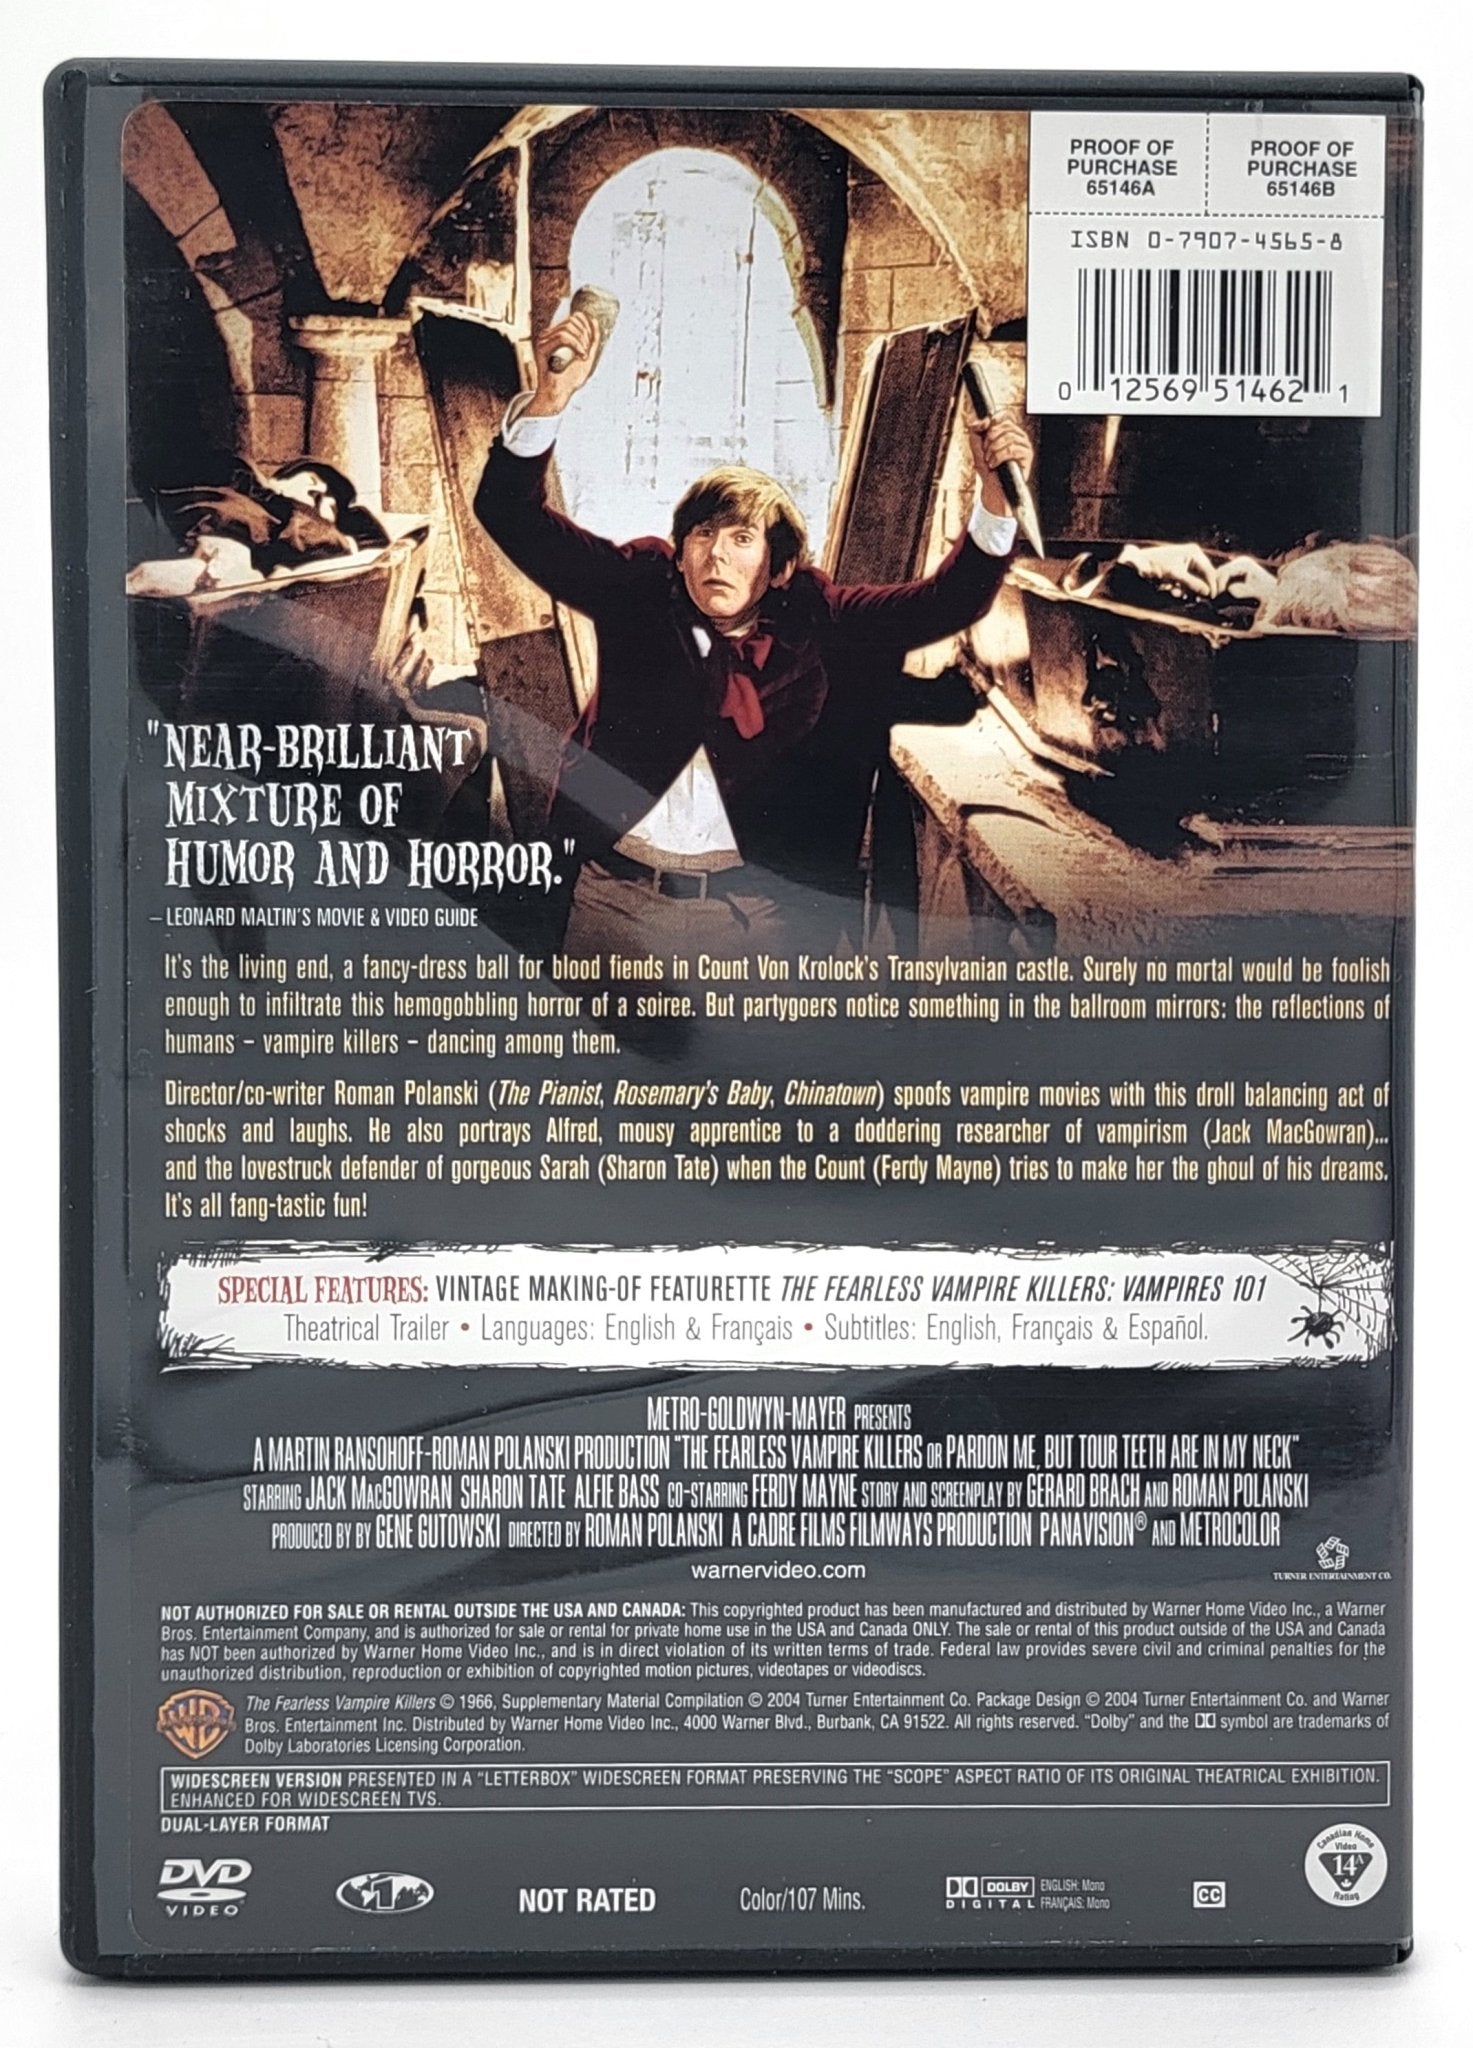 Warner Brothers - The Fearless Vampire Kilers | DVD | Widescreen - DVD - Steady Bunny Shop